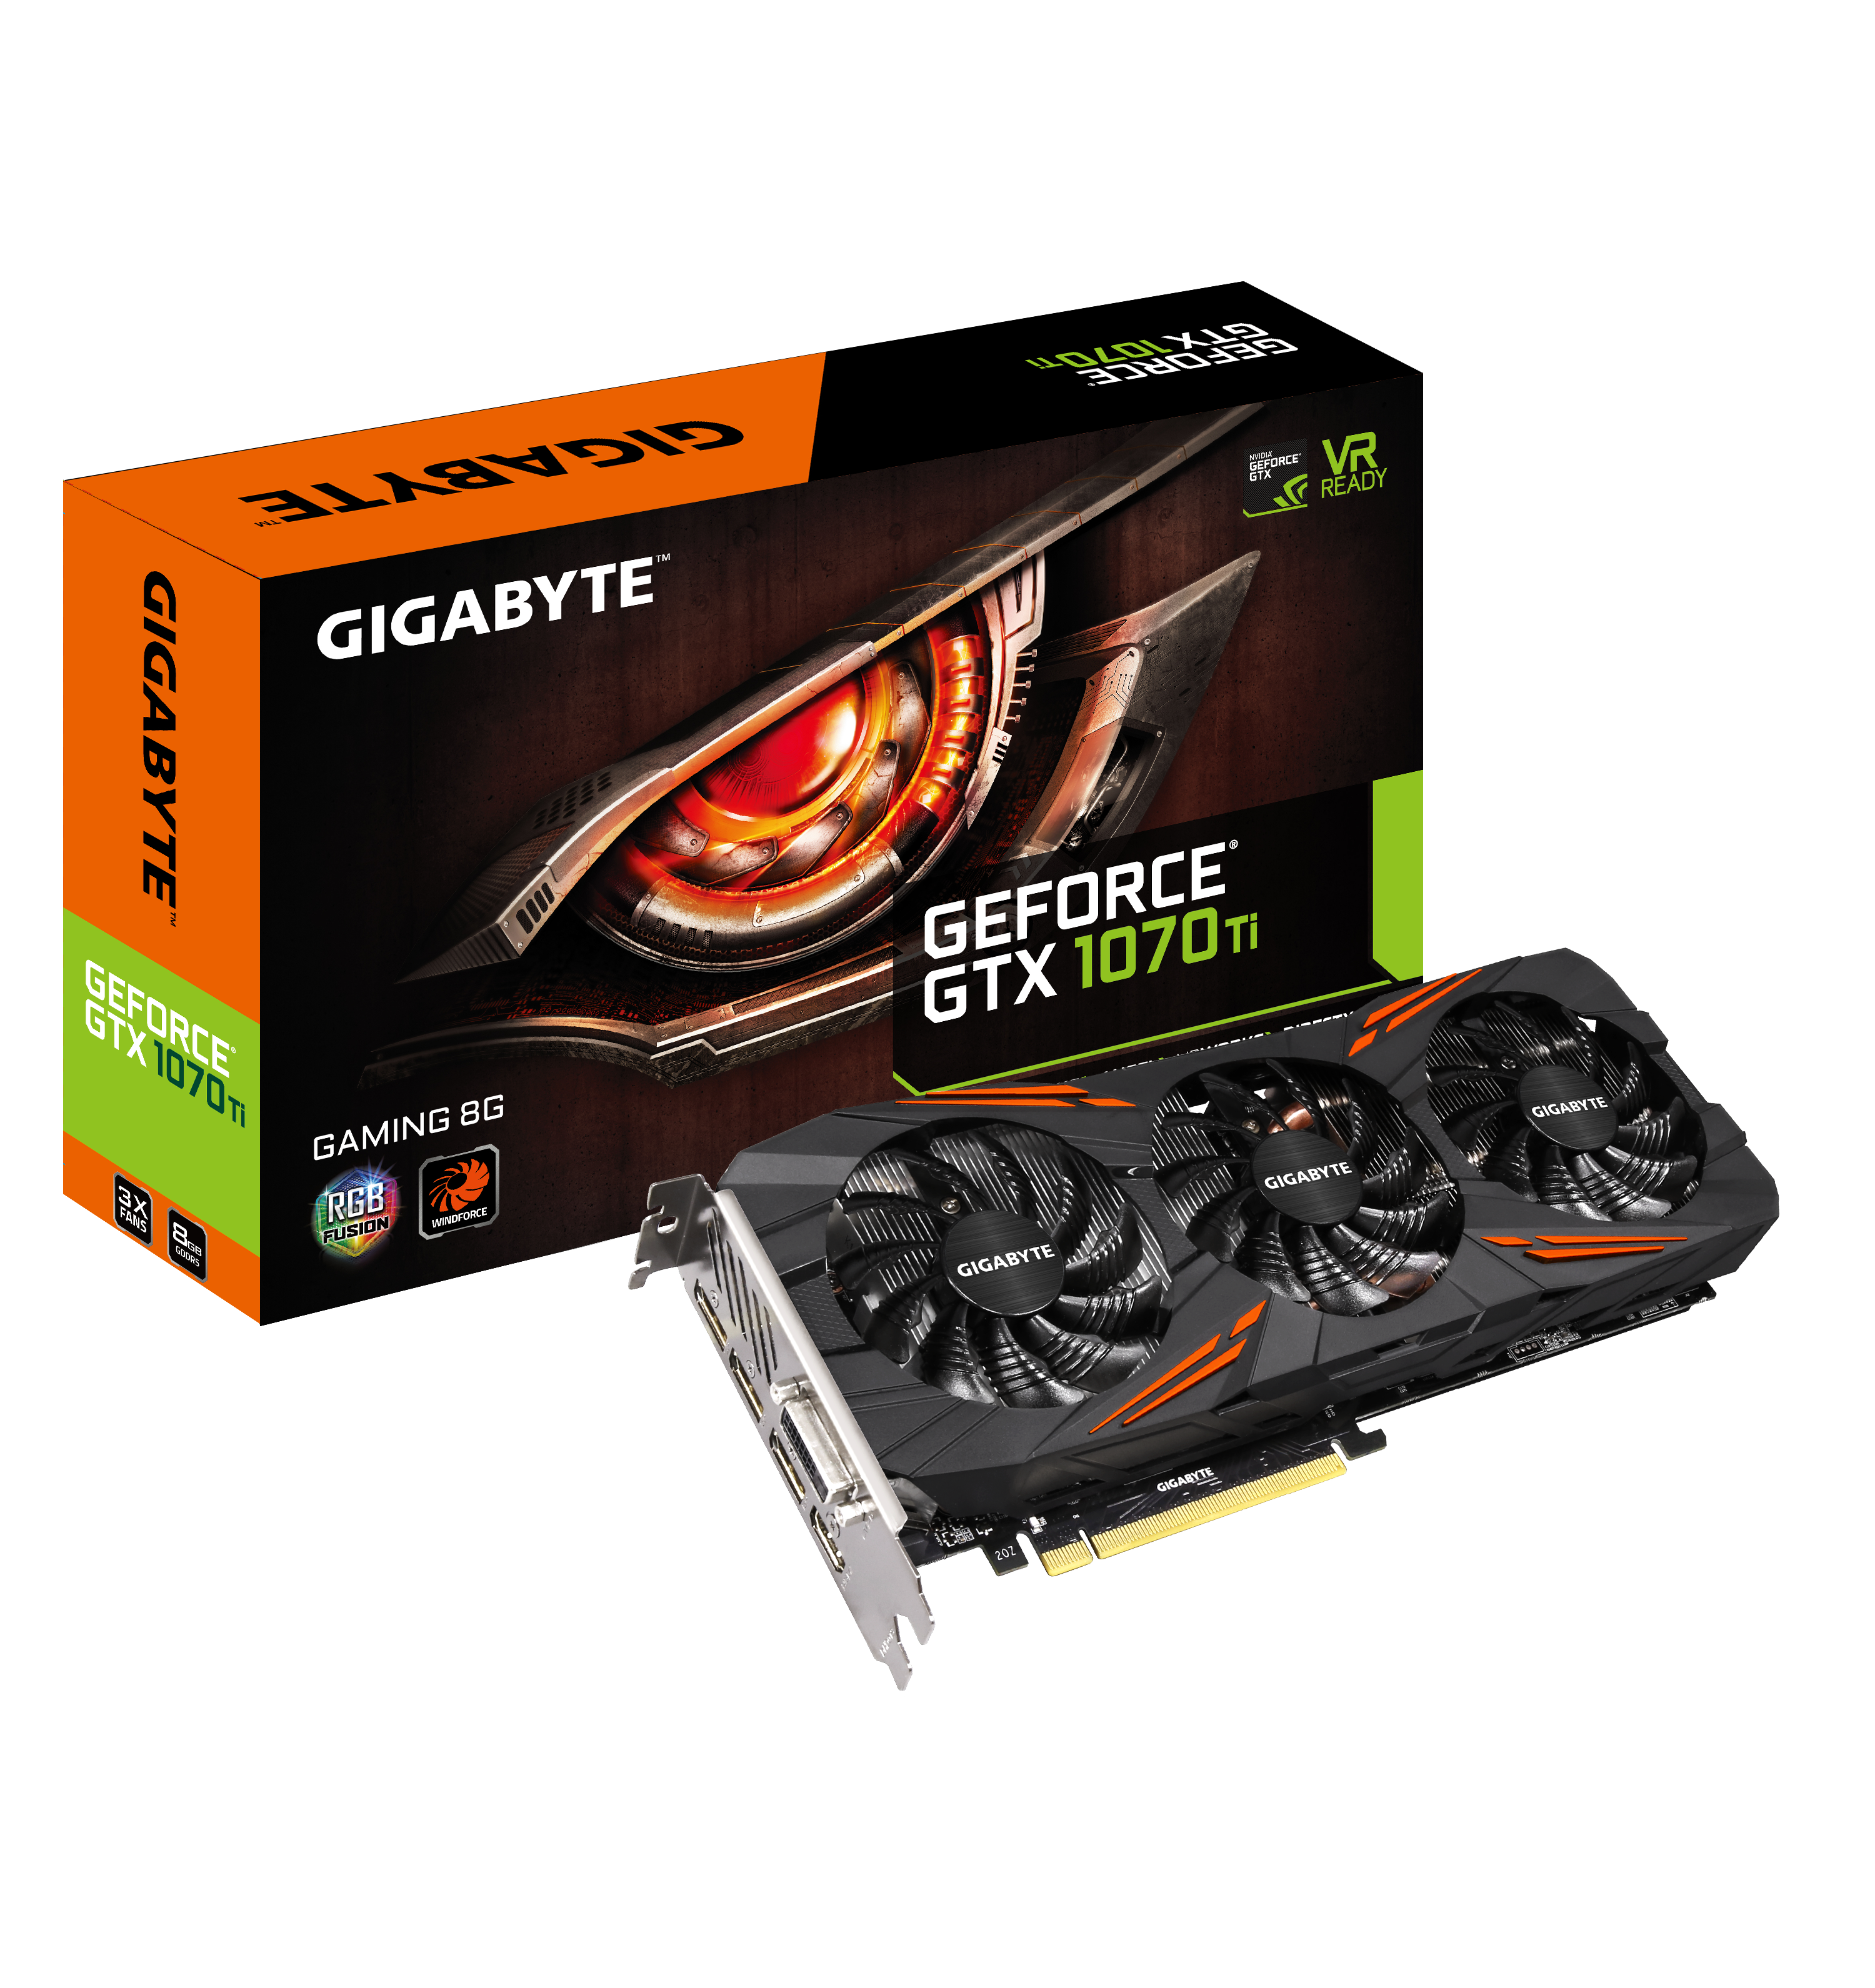 GeForce® GTX 1070 Ti Gaming 8G Key Features | Graphics Card